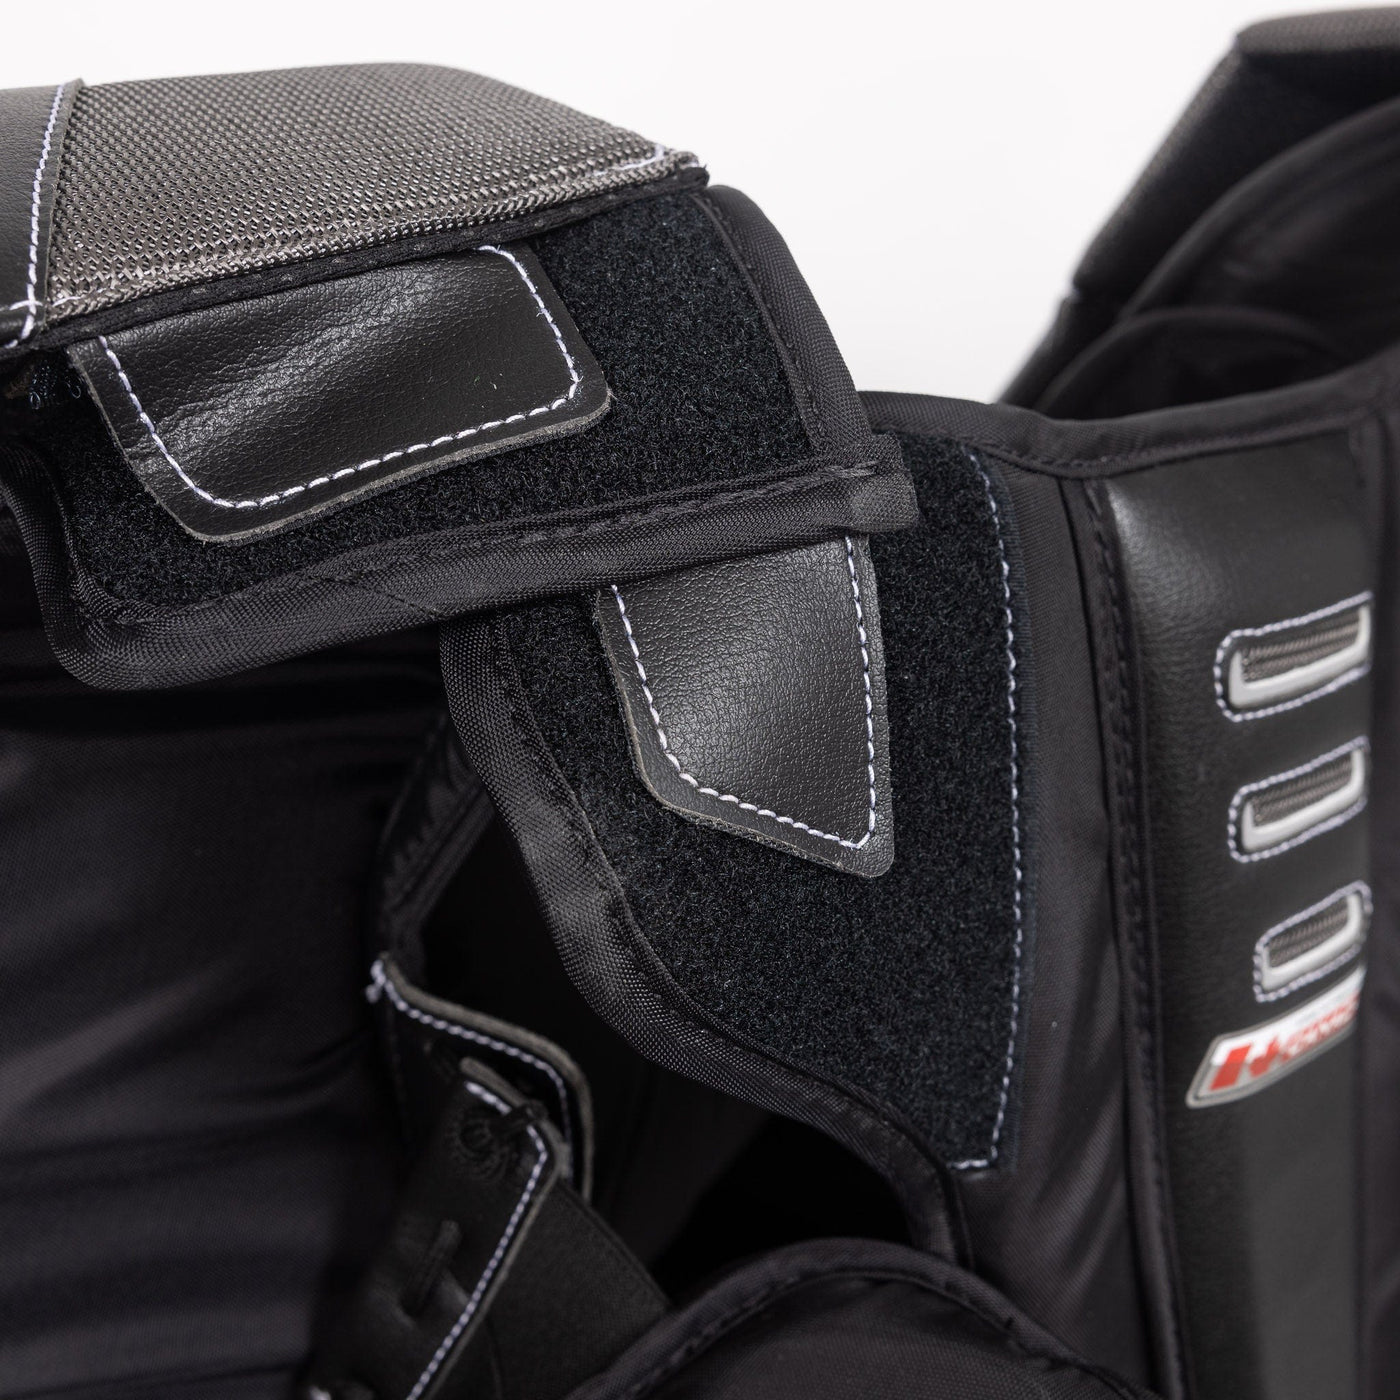 Brian's OPTiK 3 Senior Chest & Arm Protector - The Hockey Shop Source For Sports